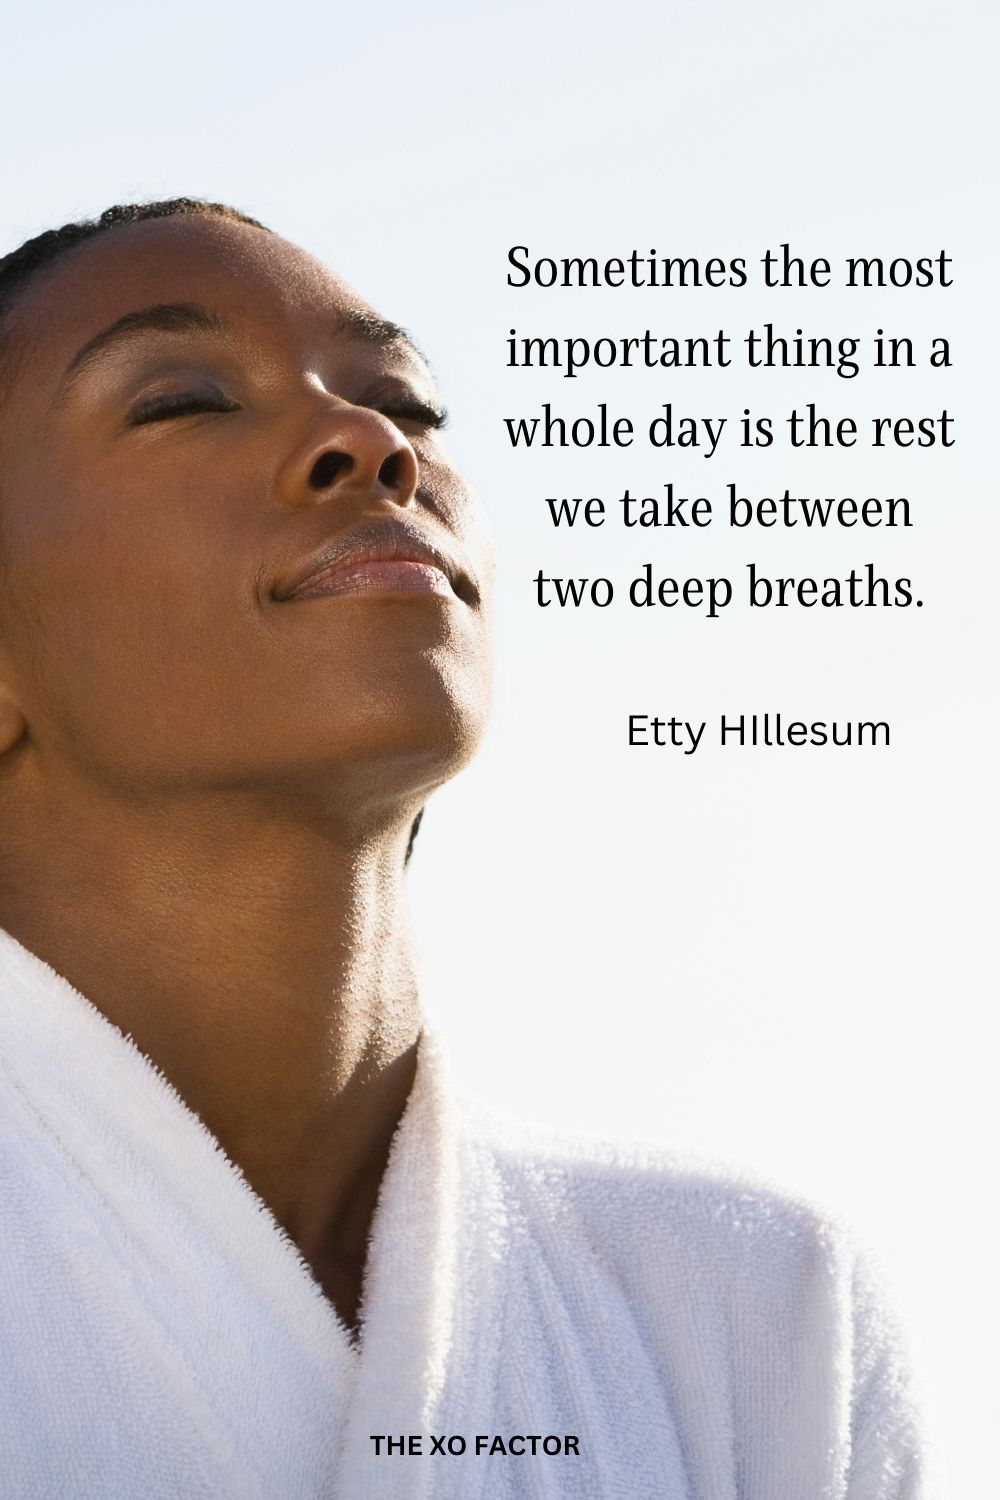 Sometimes the most important thing in a whole day is the rest we take between two deep breaths.
Etty HIllesum